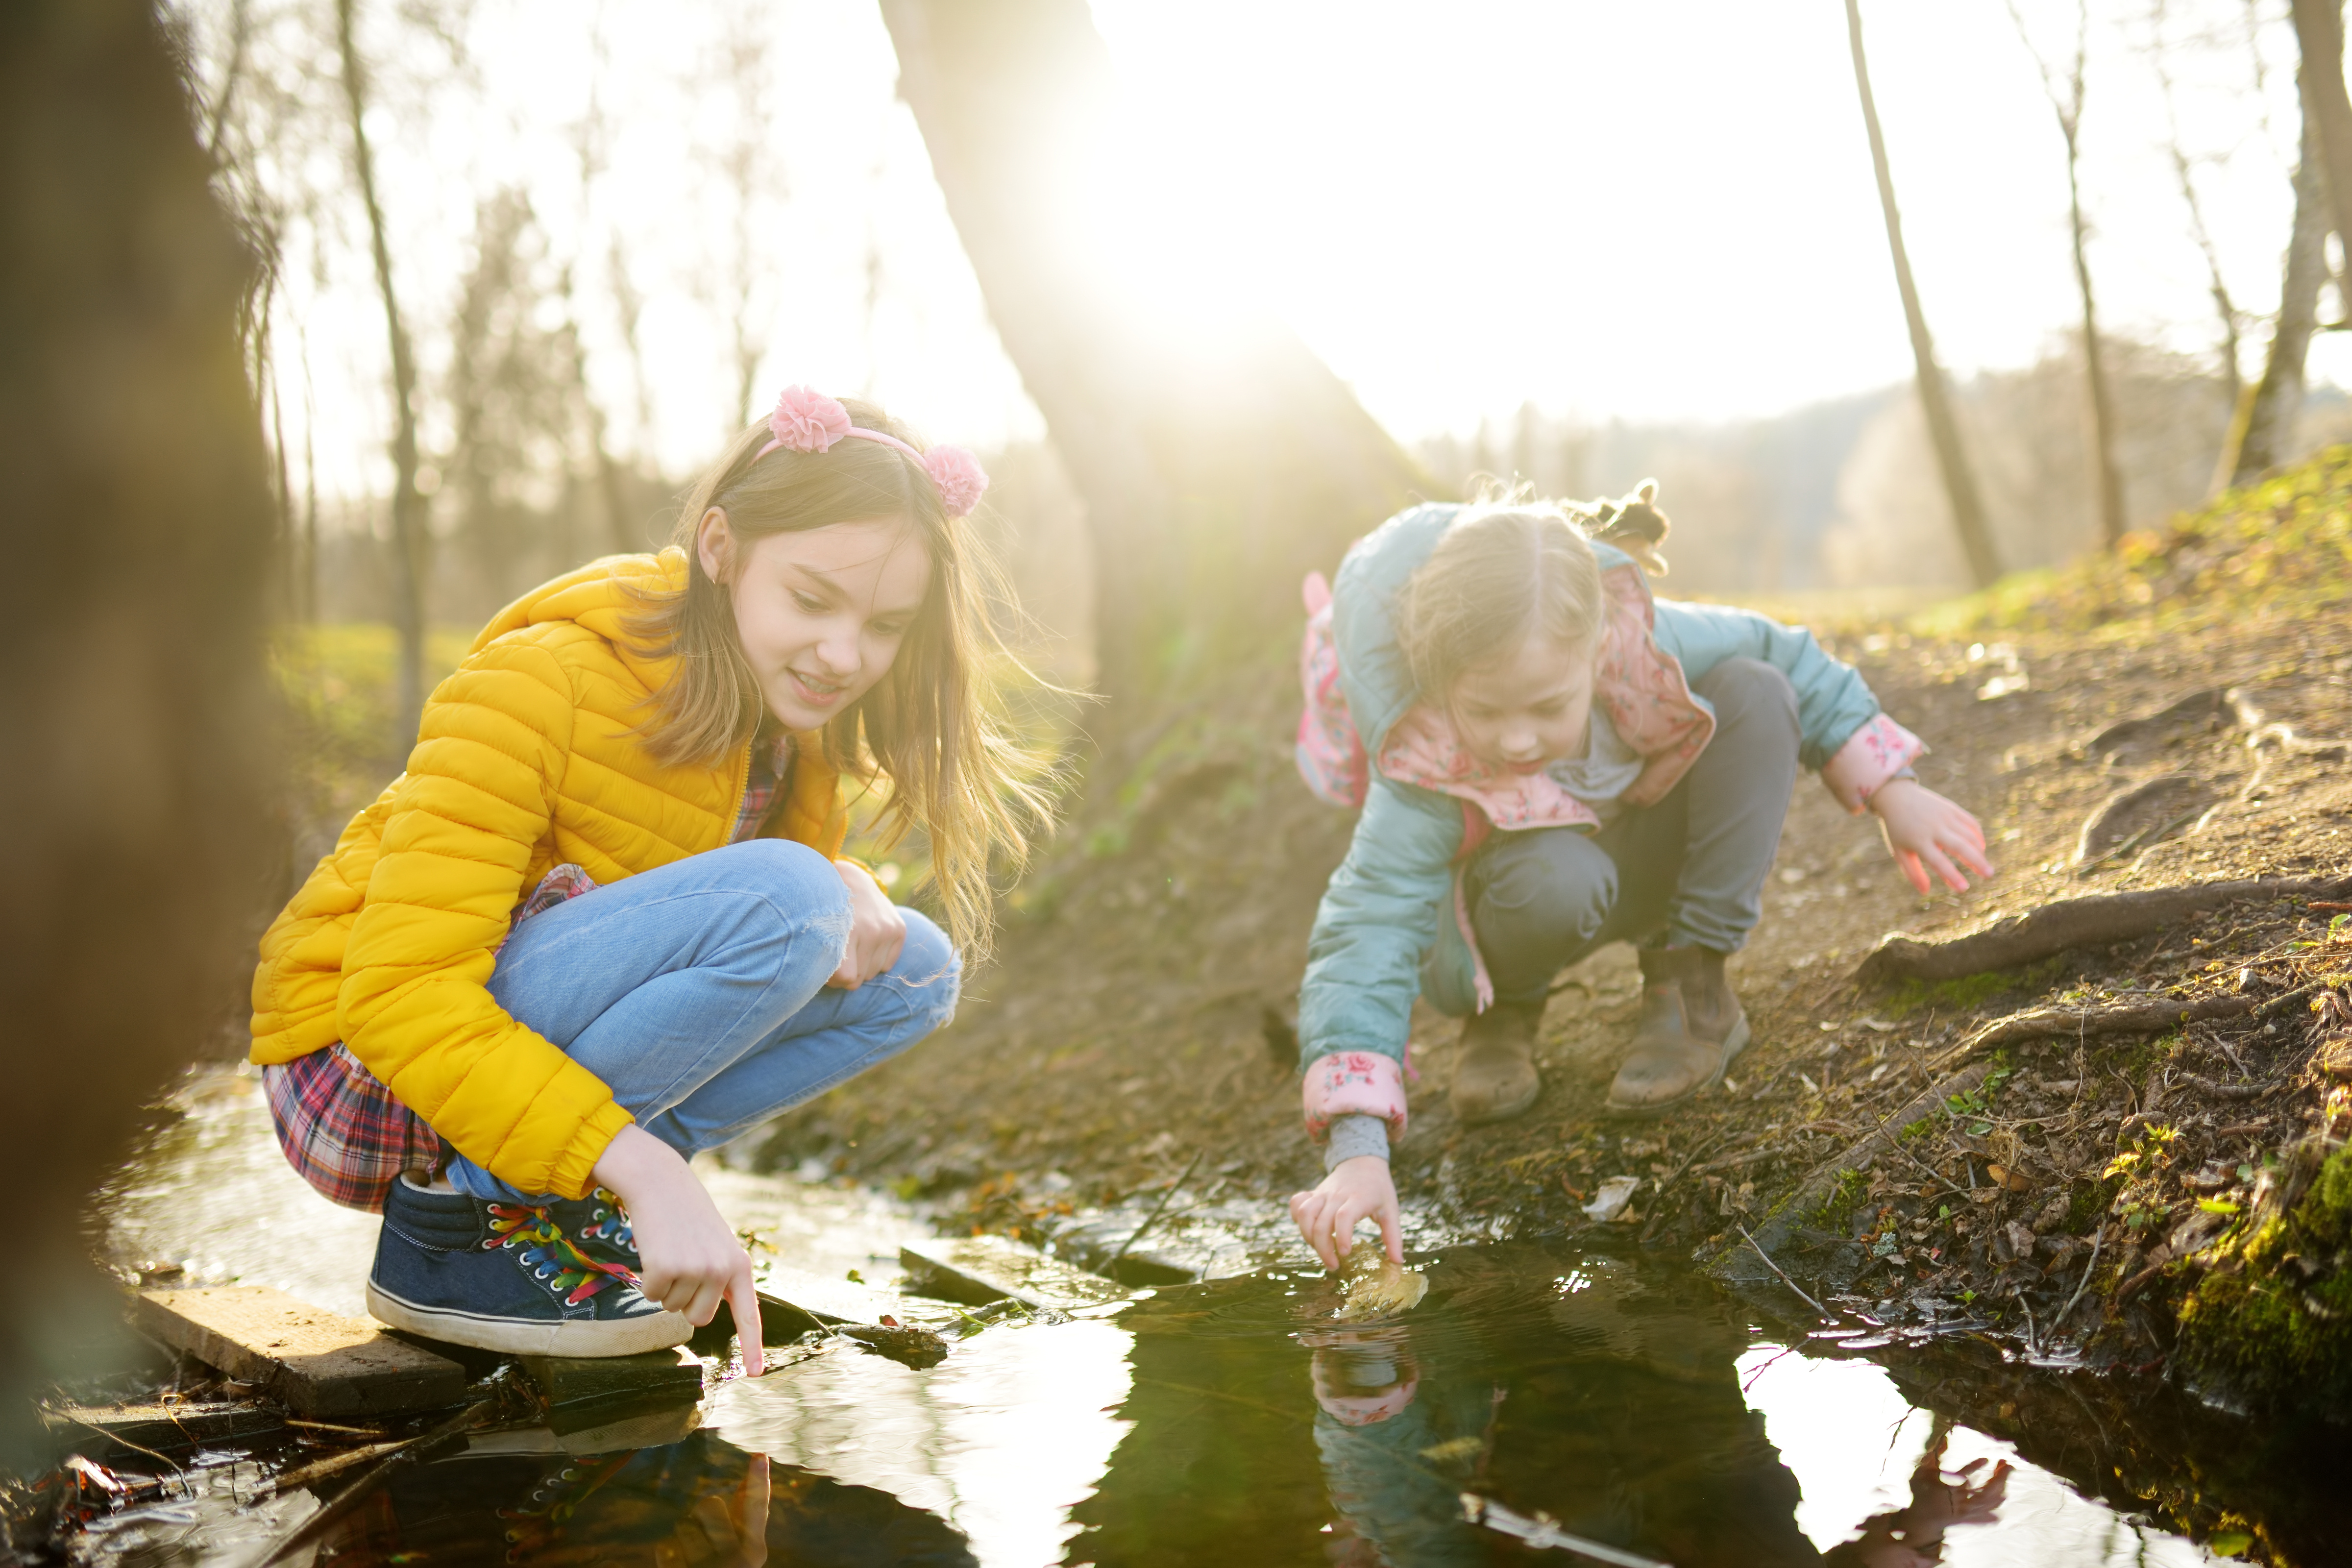 Two young kids play in a creek together